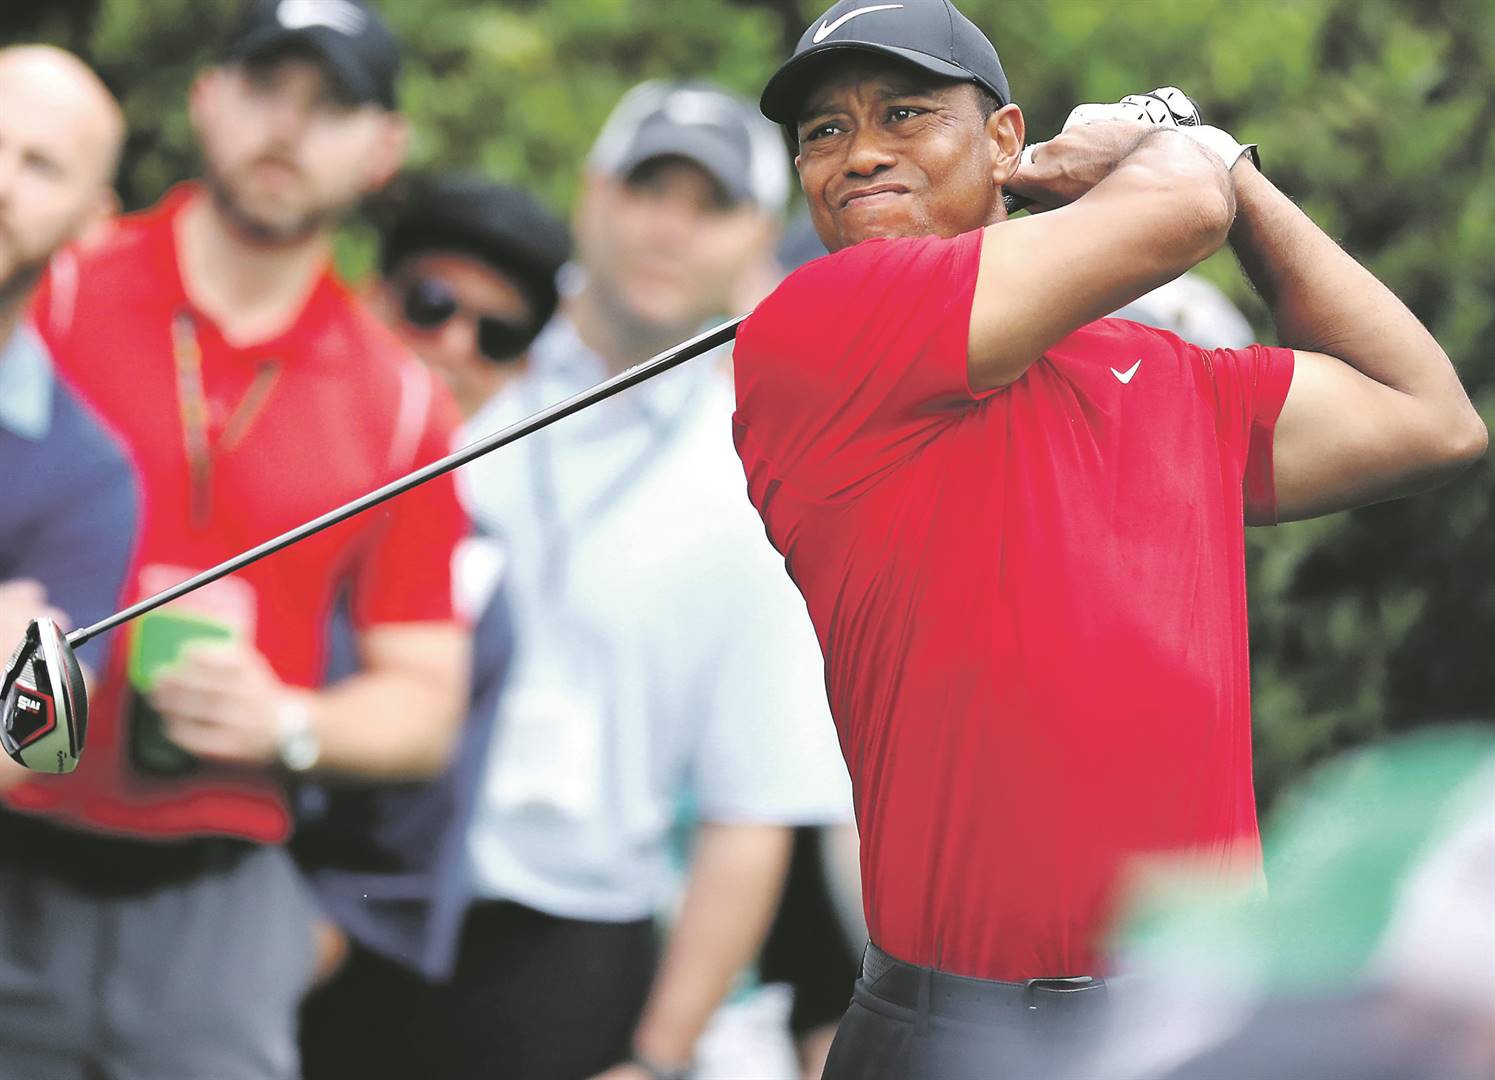 RESURGENT Tiger Woods’ victory at the Masters after a long spell with no Major wins has sparked speculation that he is back in top form. Picture: David Cannon / Getty images